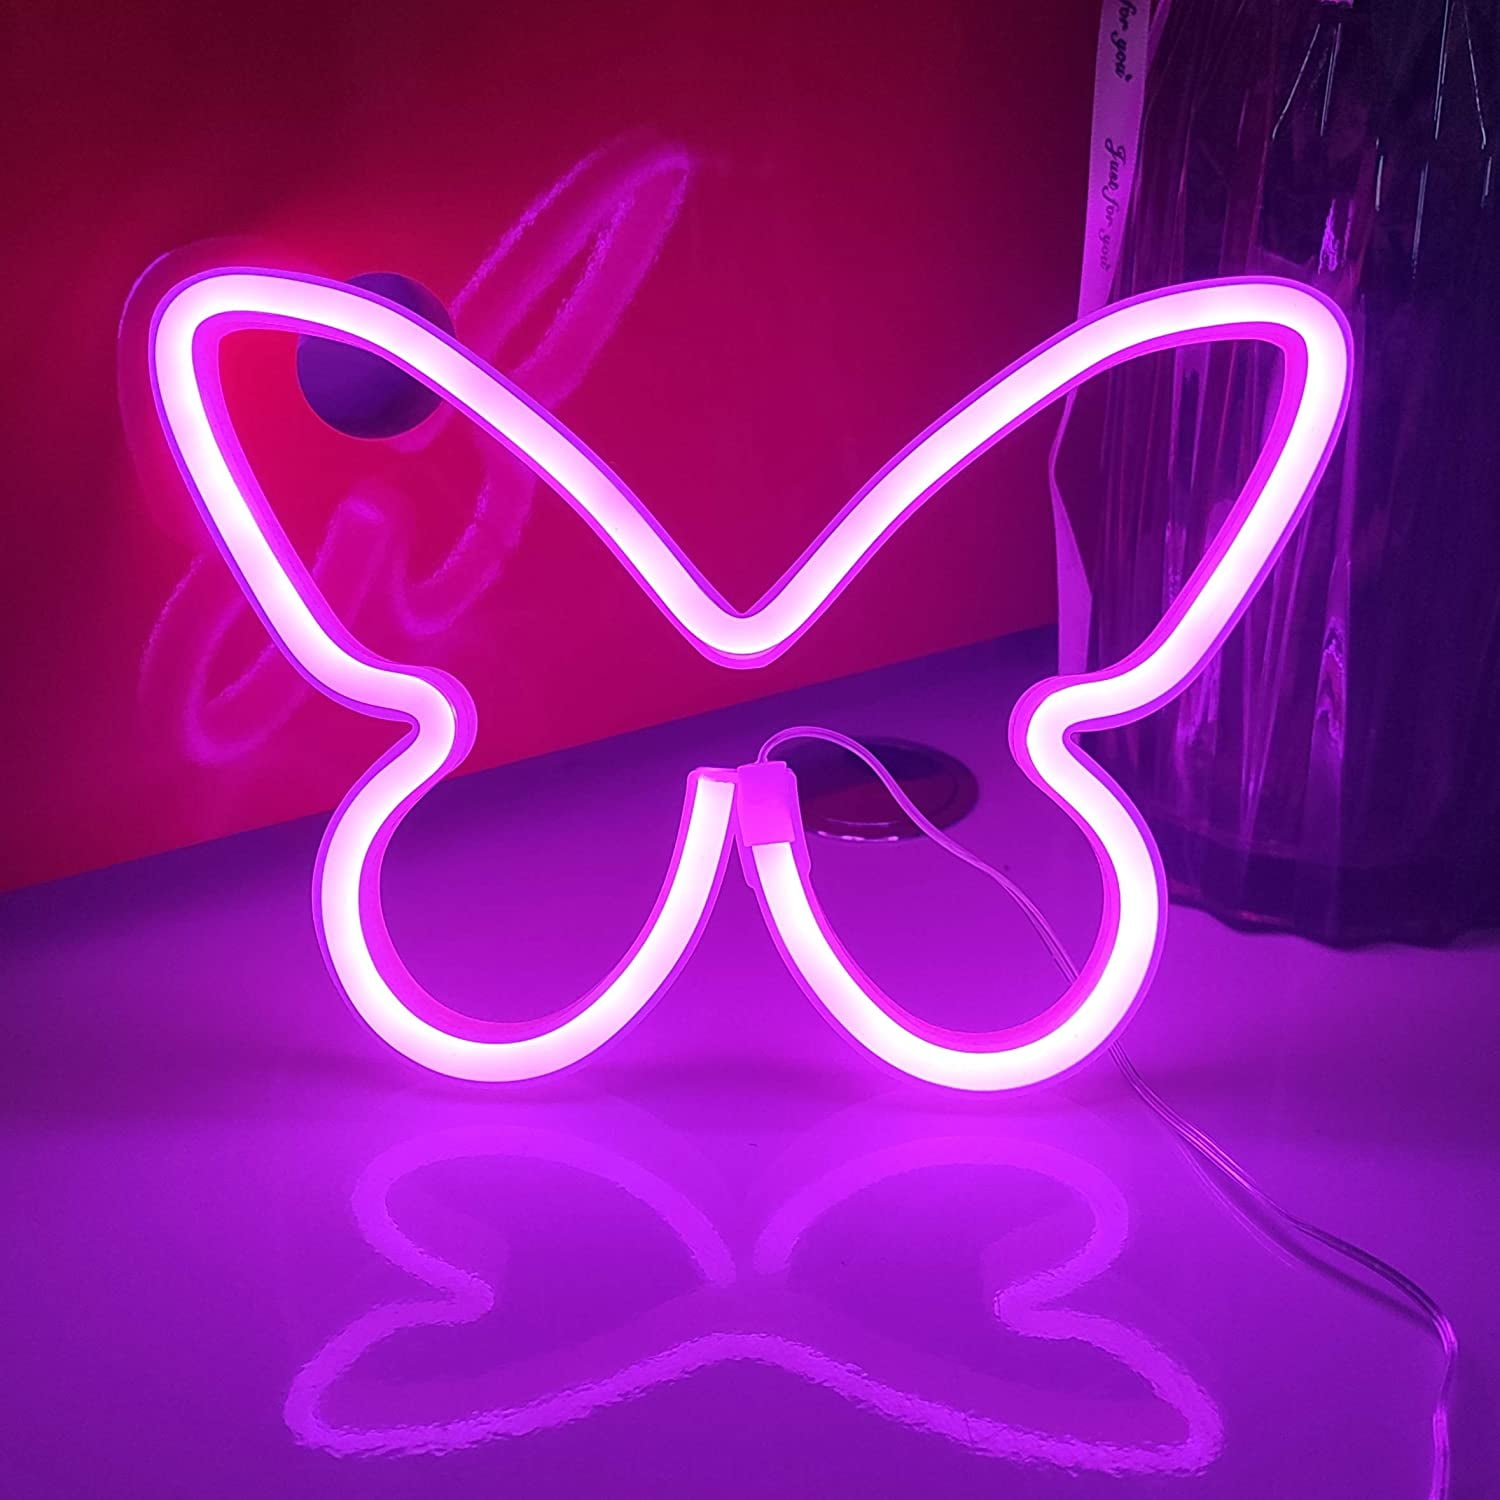 Butterfly Neon Signs,3-AA Battery Powered Neon Light,LED Lights Table Decoration,Girls Bedroom Wall Décor,Kids Gift,Wedding Supplies Business Gifts Neon Signs (Pink) - Walmart.com